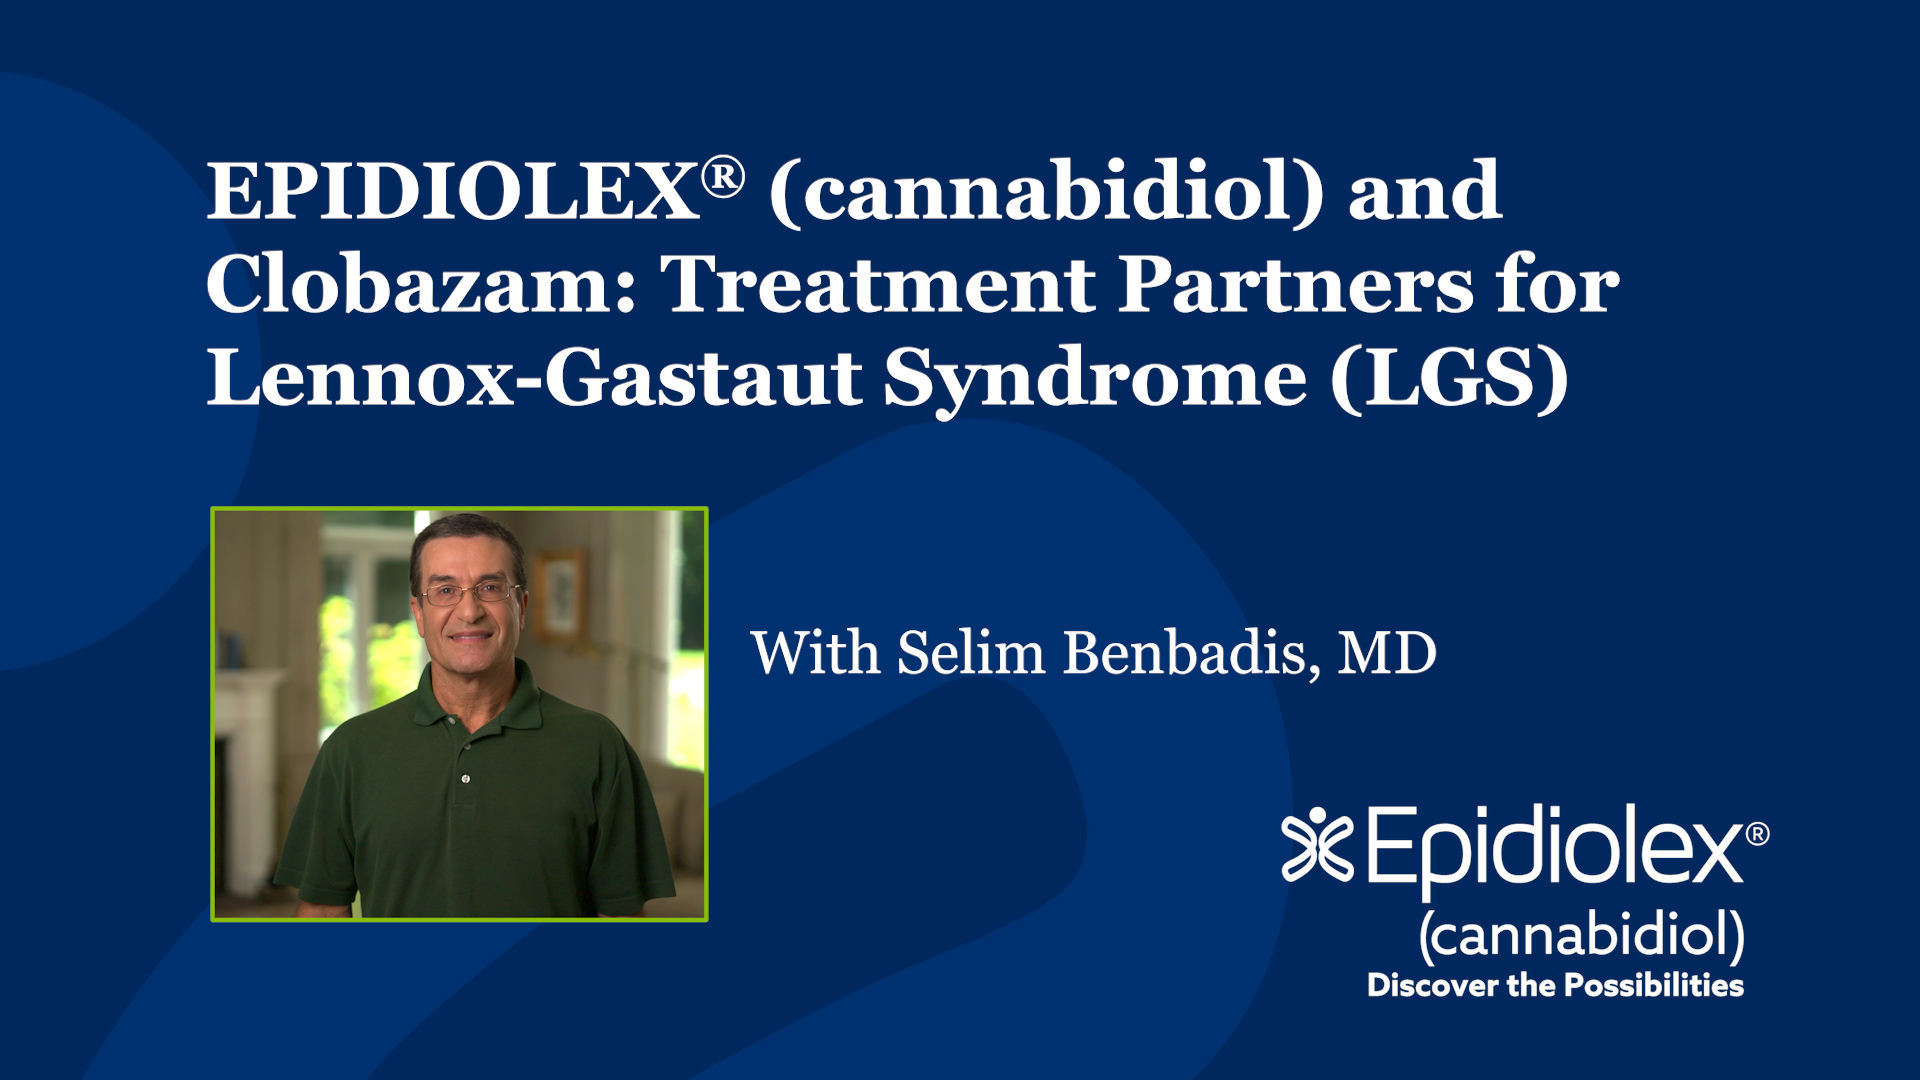 Dr. Benbadis discusses how EPIDIOLEX and another established AED work together to potentially reduce seizures in Lennox-Gastaut Syndrome (LGS)